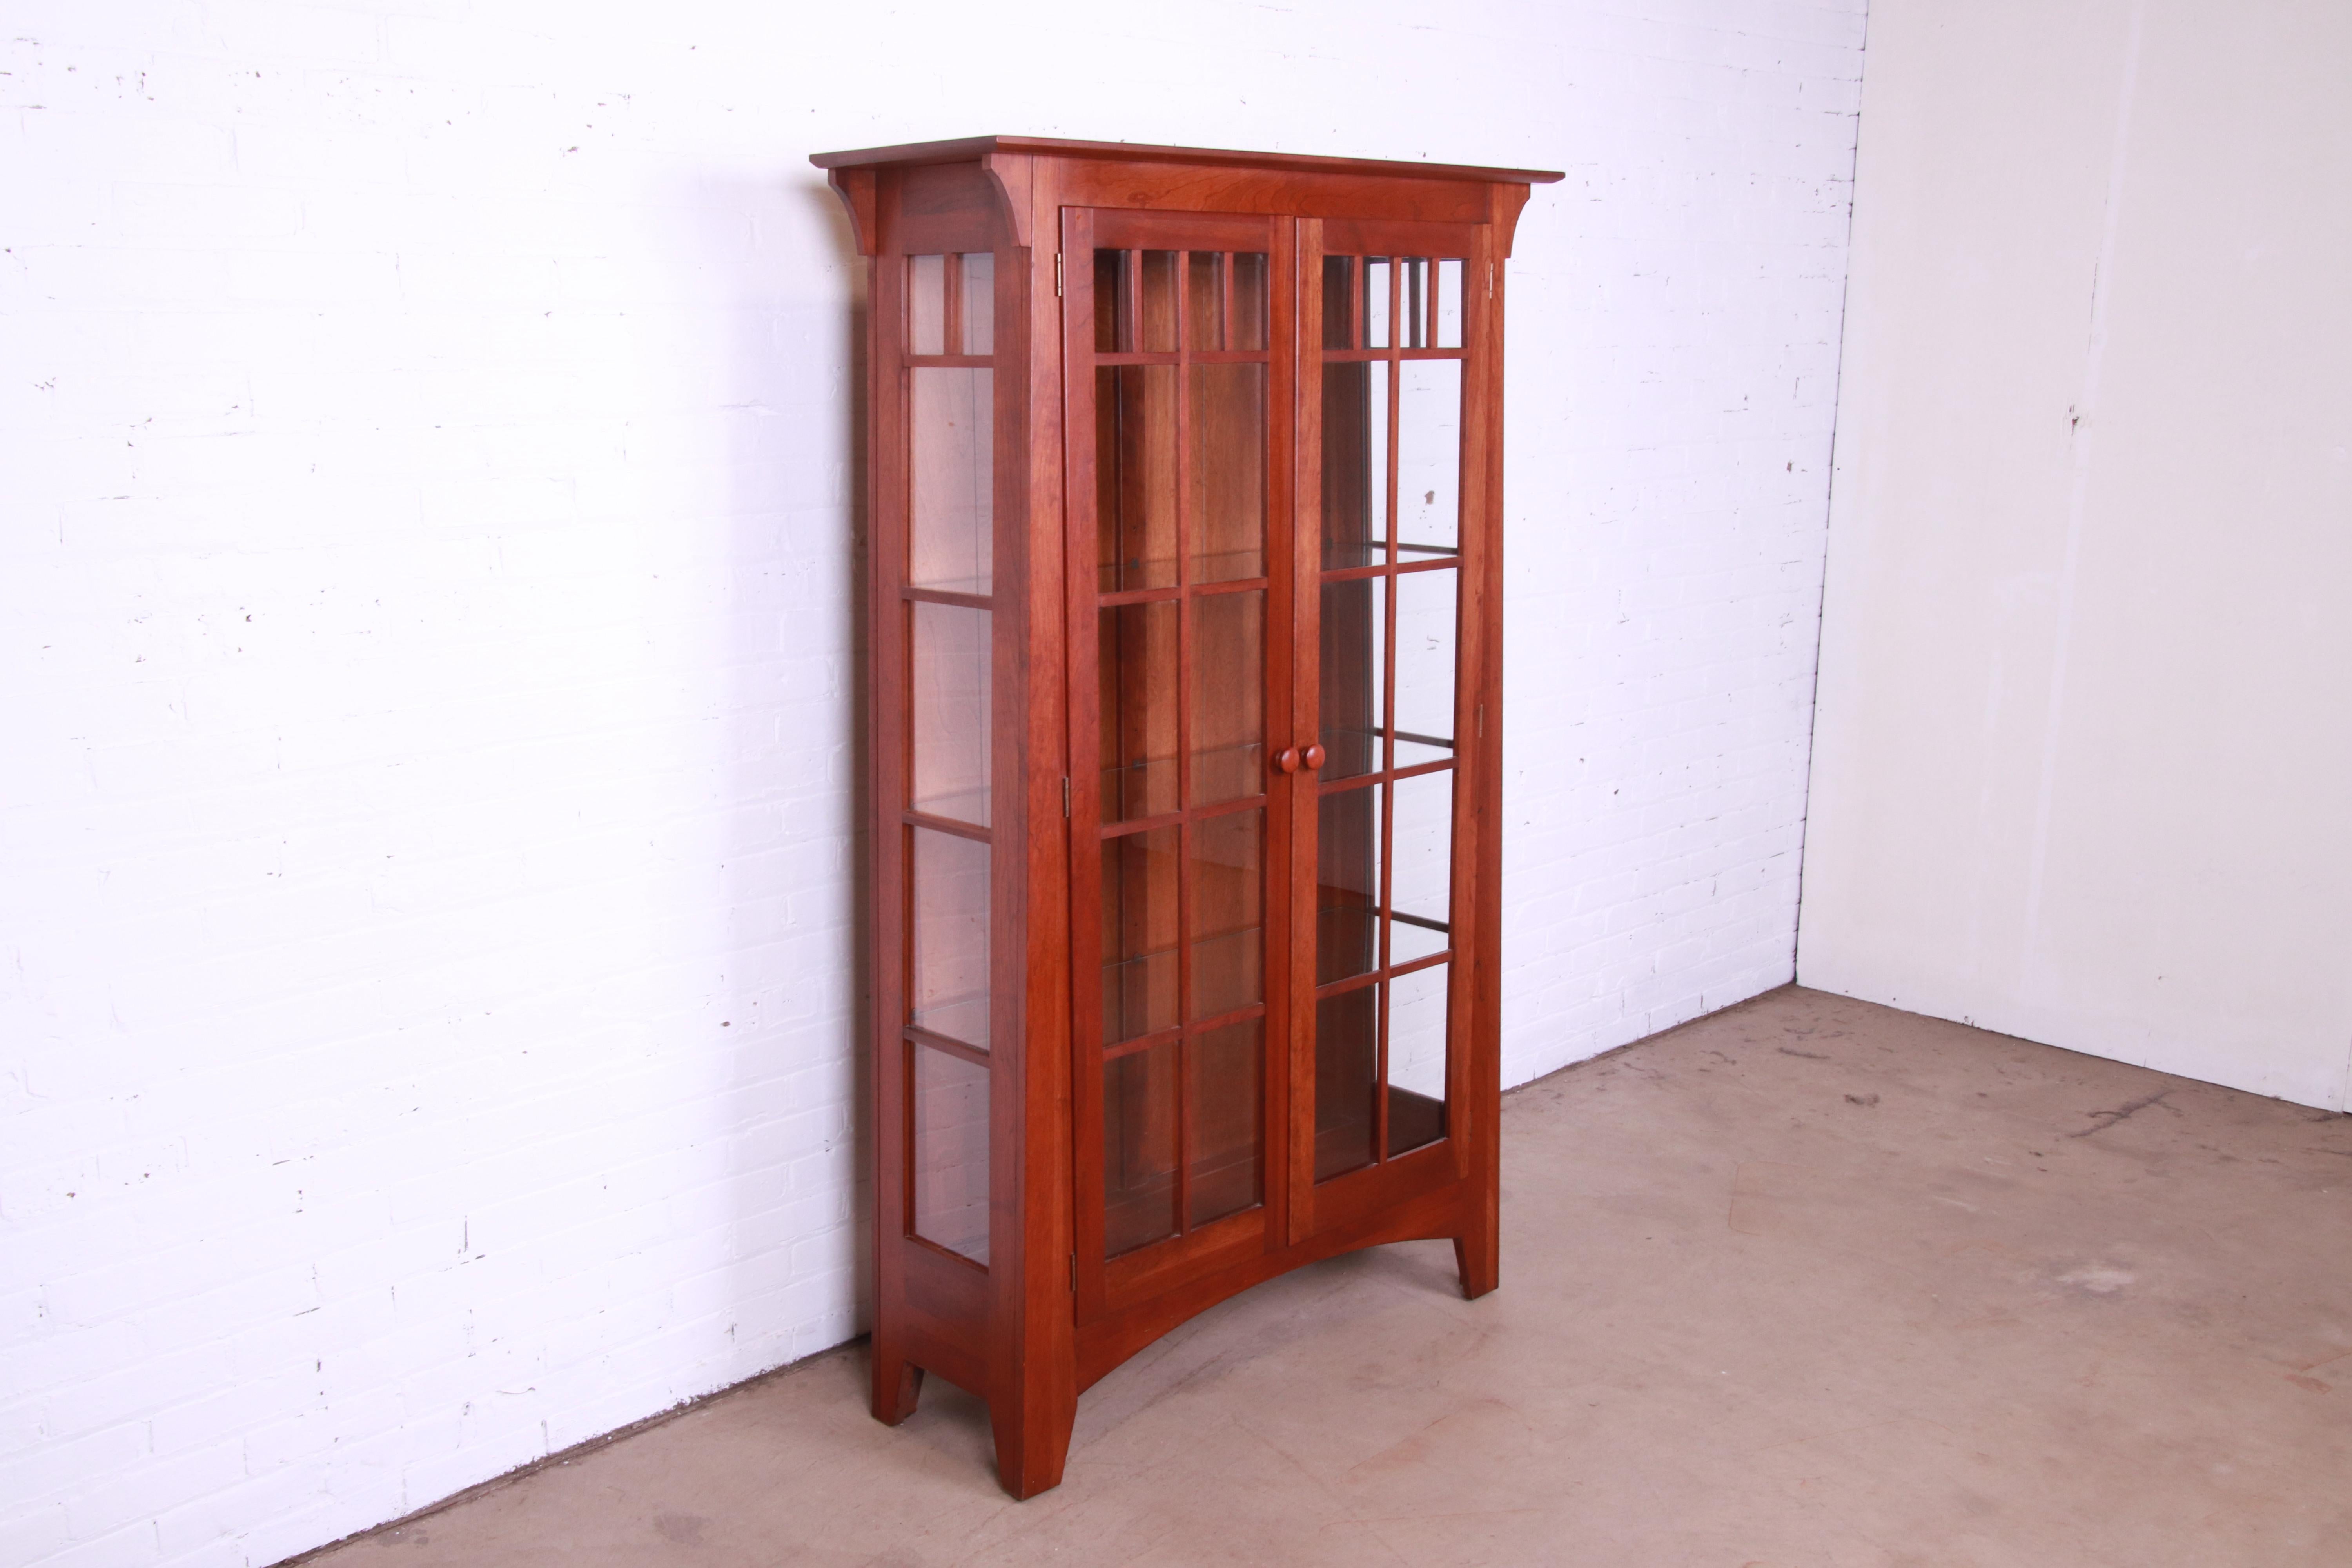 American Ethan Allen Arts & Crafts Solid Cherry Wood Lighted Bookcase or Display Cabinet